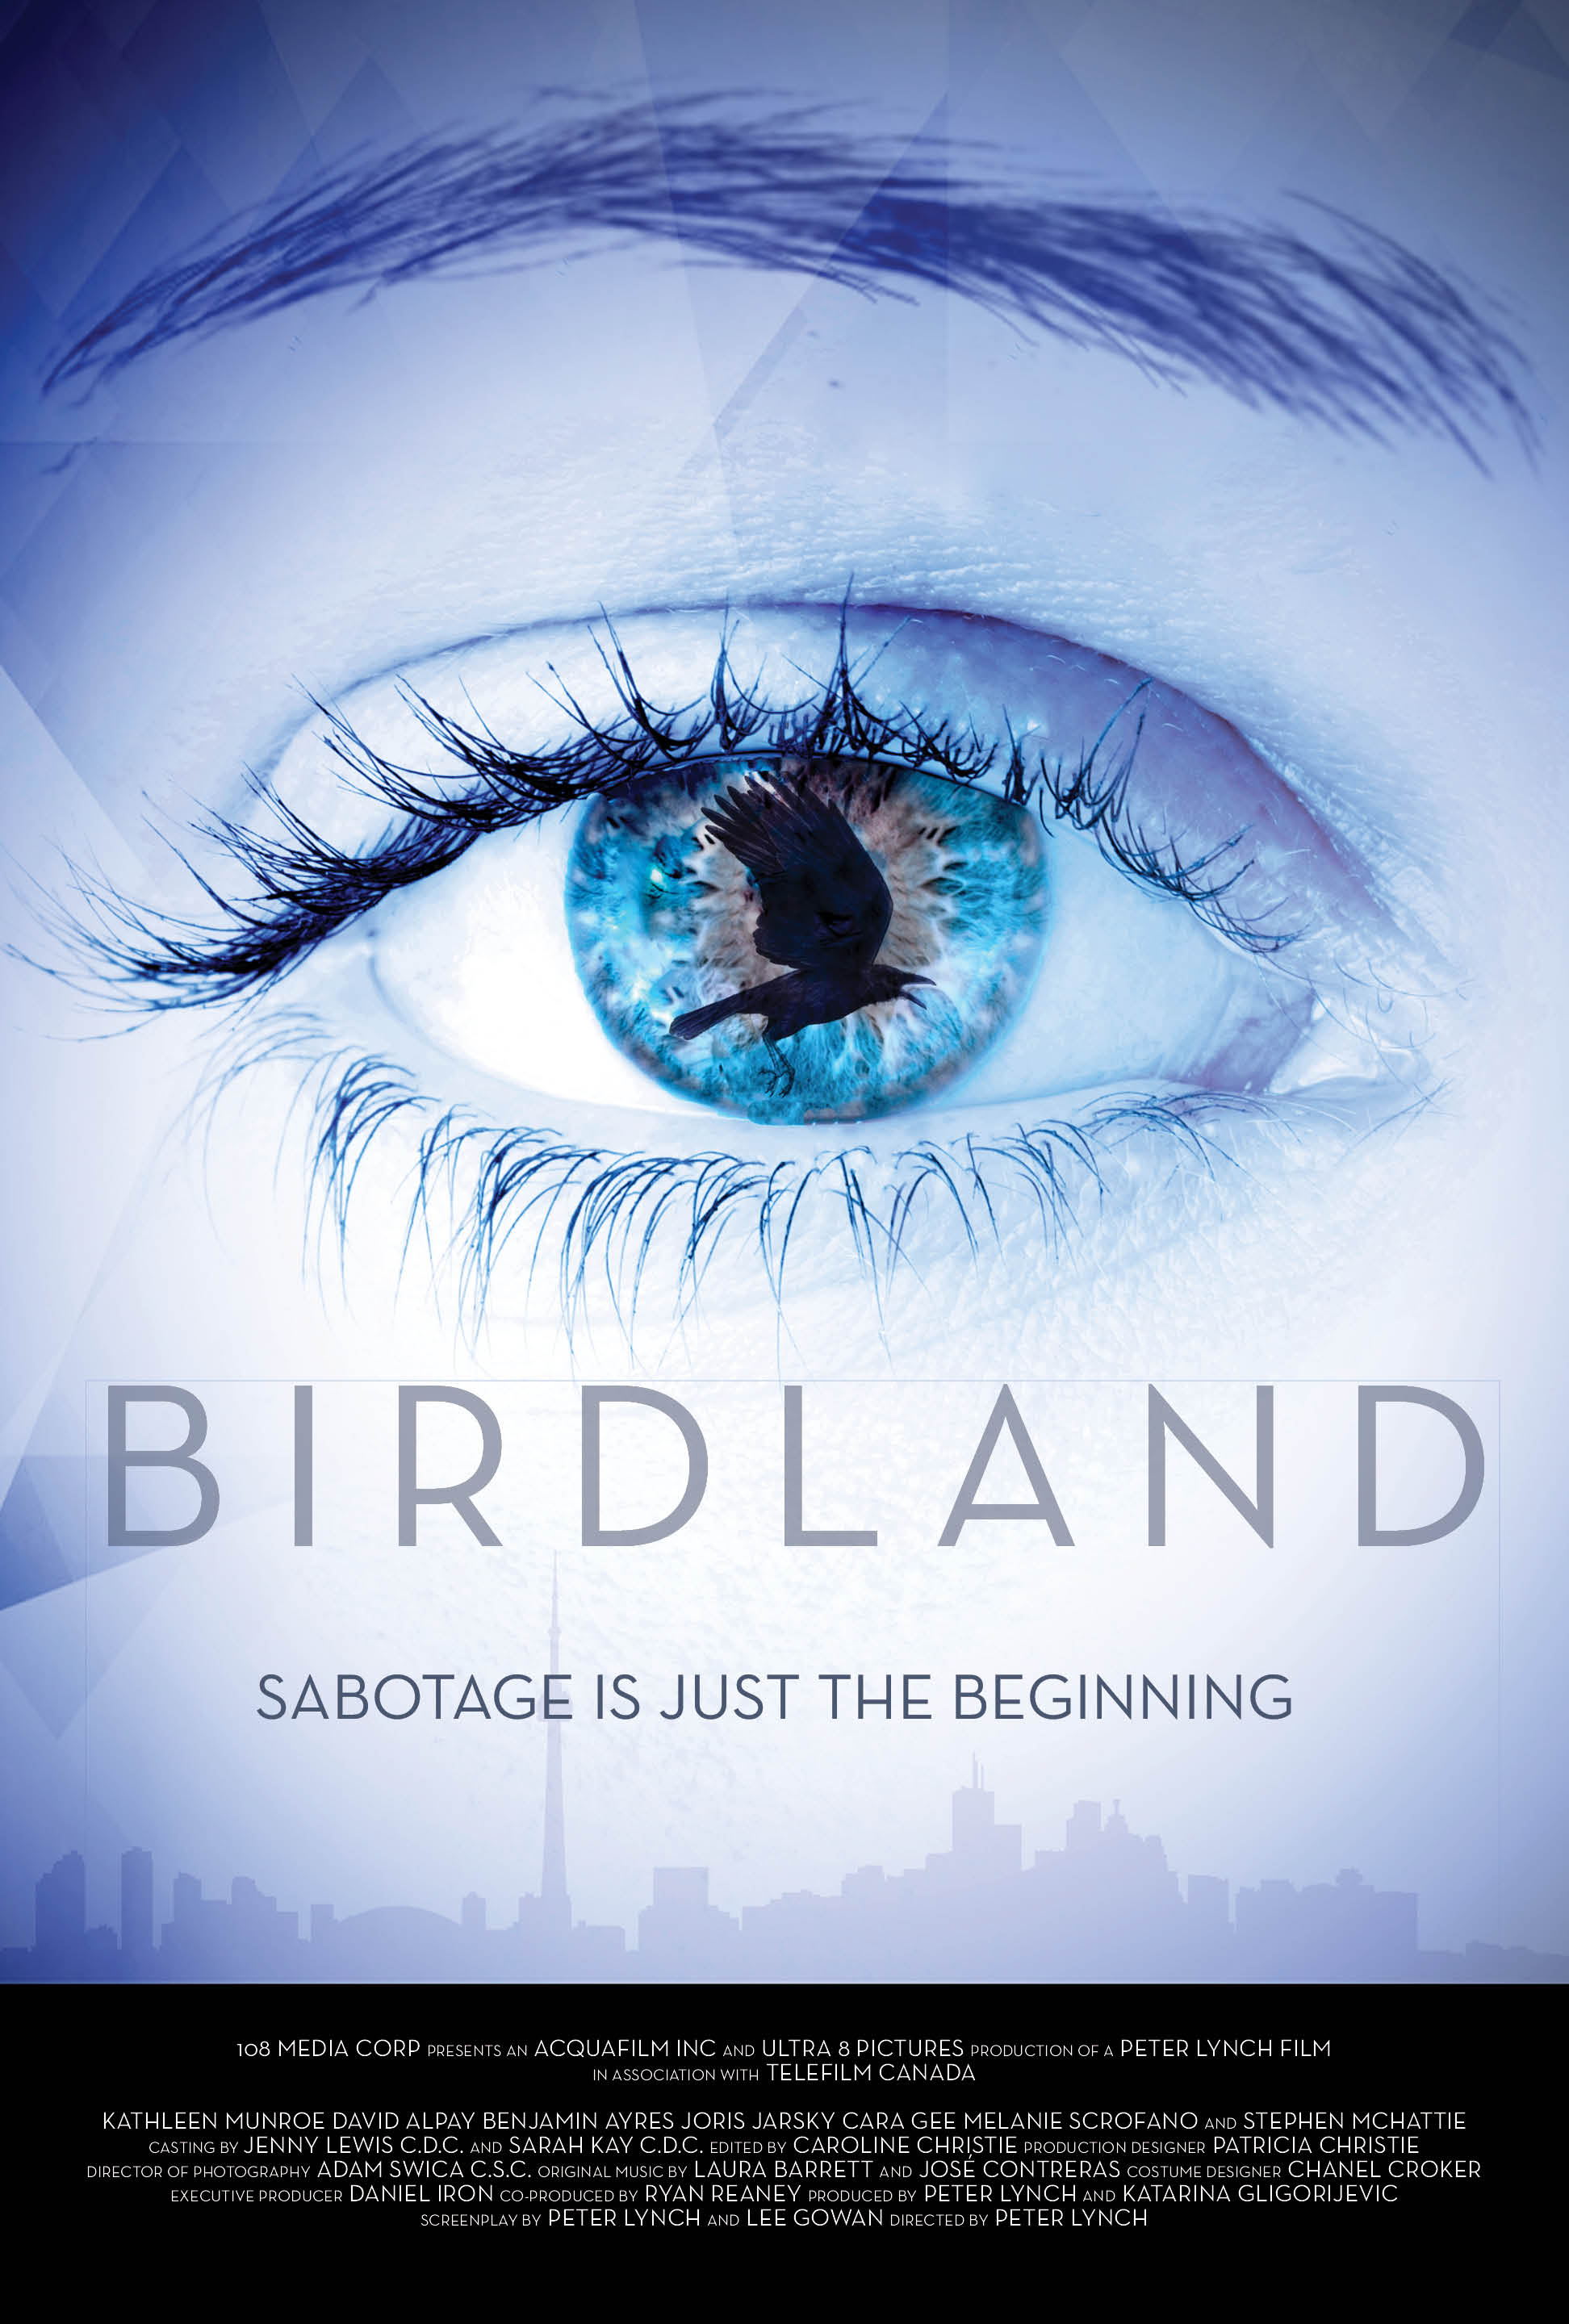 Poster for the movie Birdland